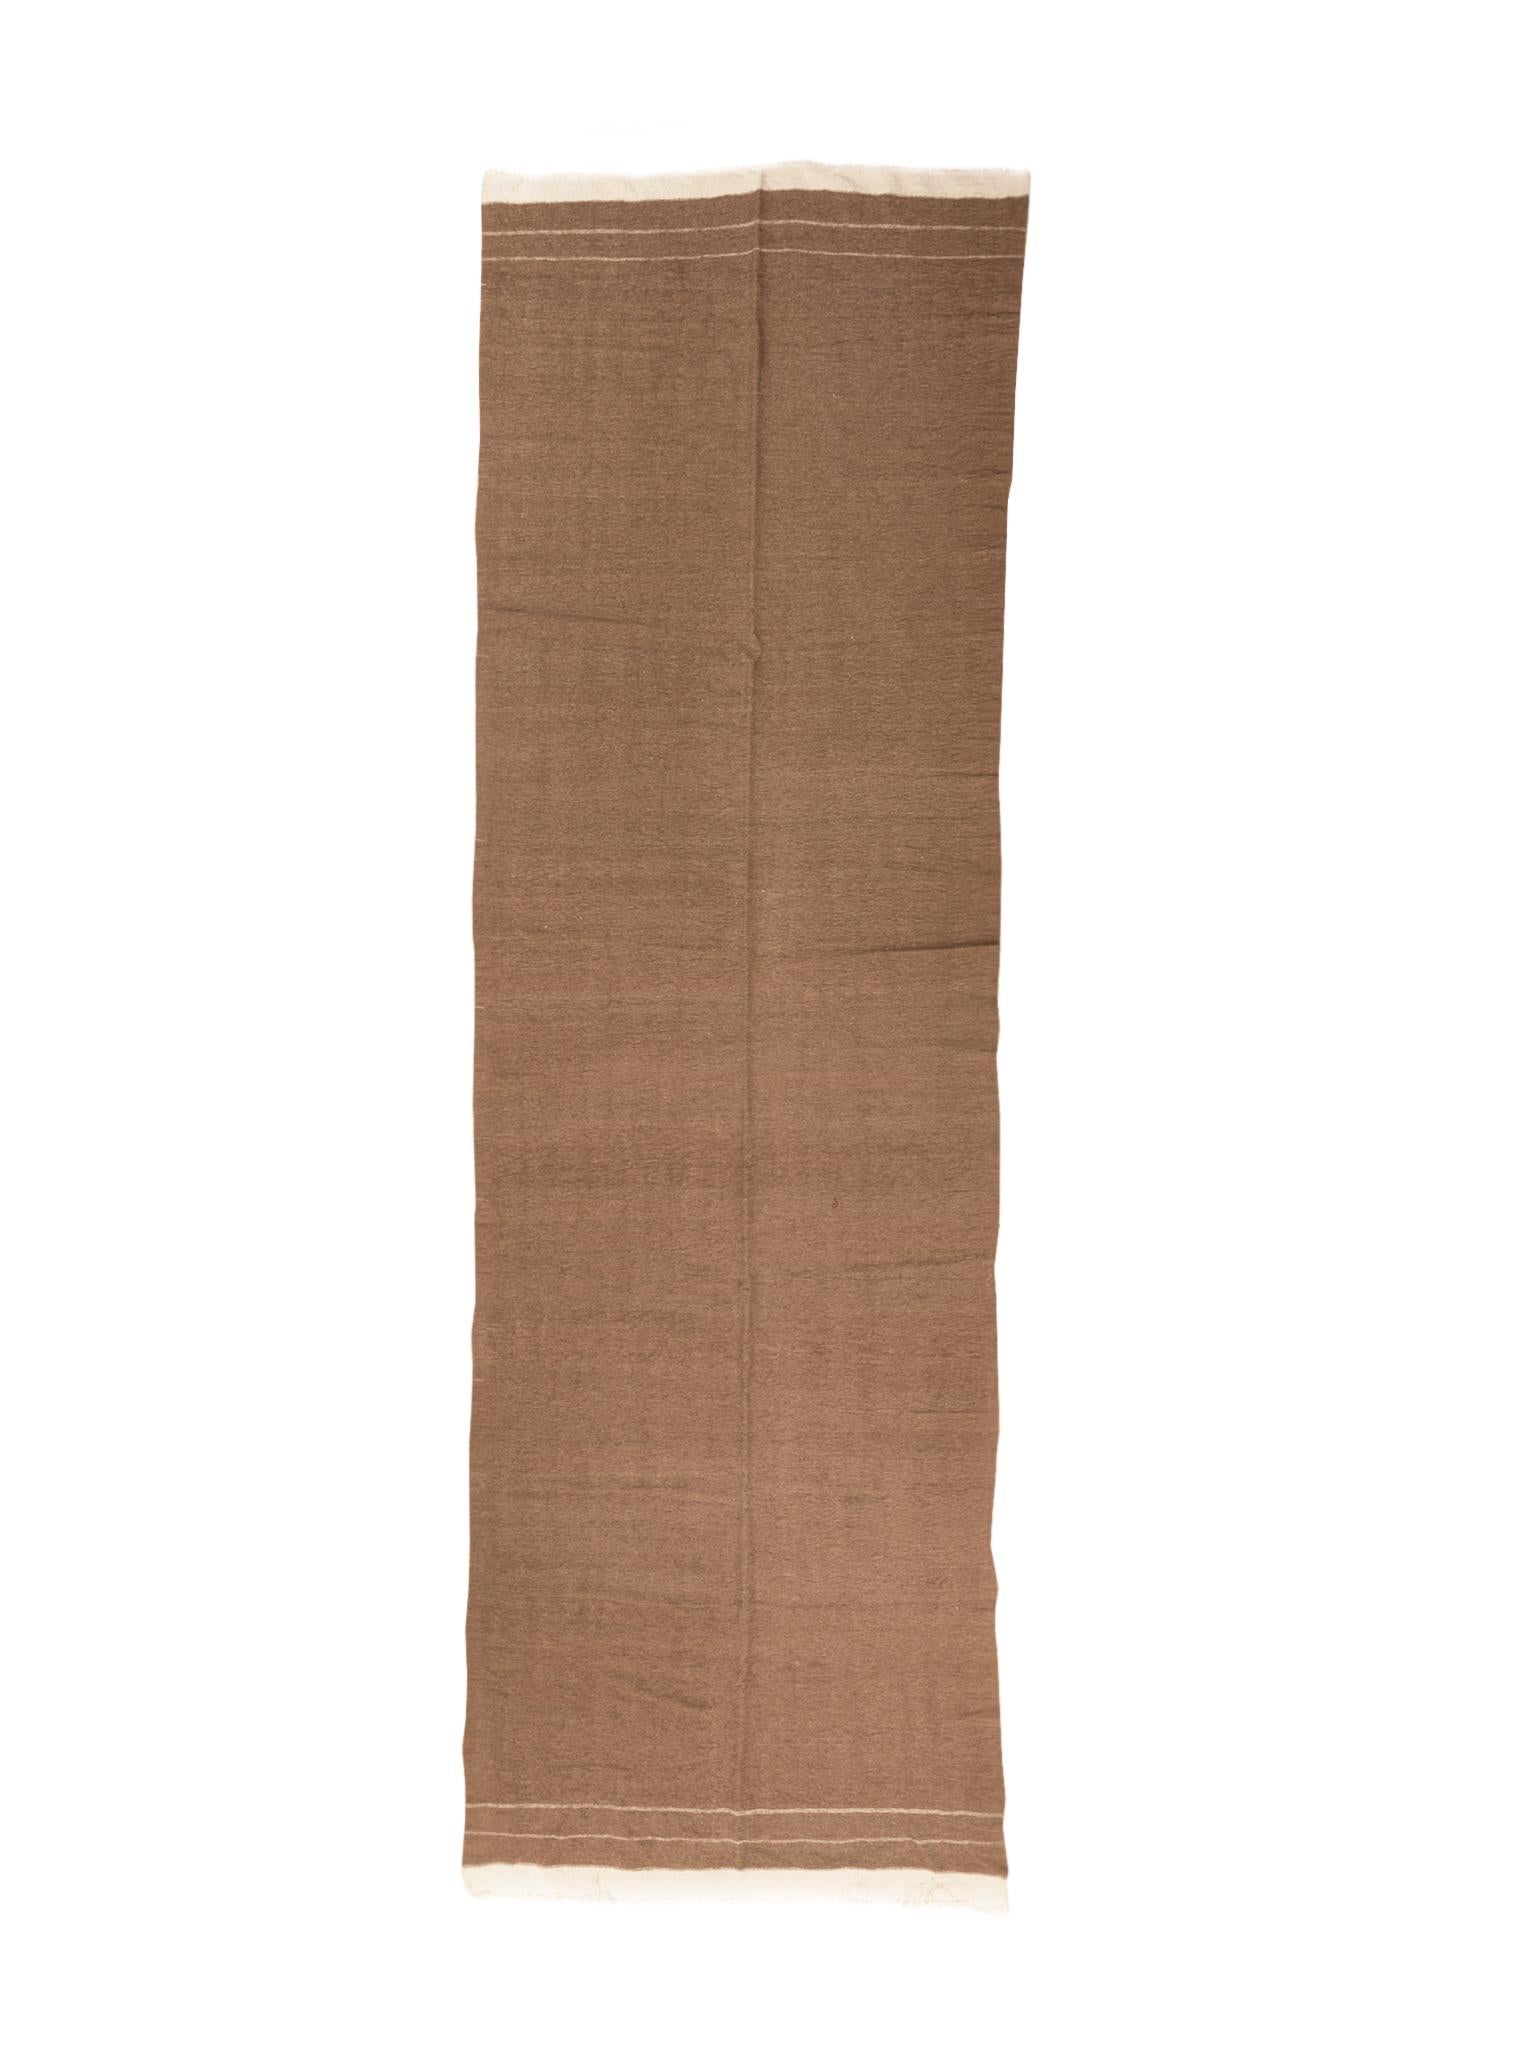 A Moroccan flat-weave runner, handwoven in the 1960s. Warm brown tone with frills in a beige white. Elegant, minimal patterning at either end. A series of bands in the same beige color.

Dimensions:
15' 3